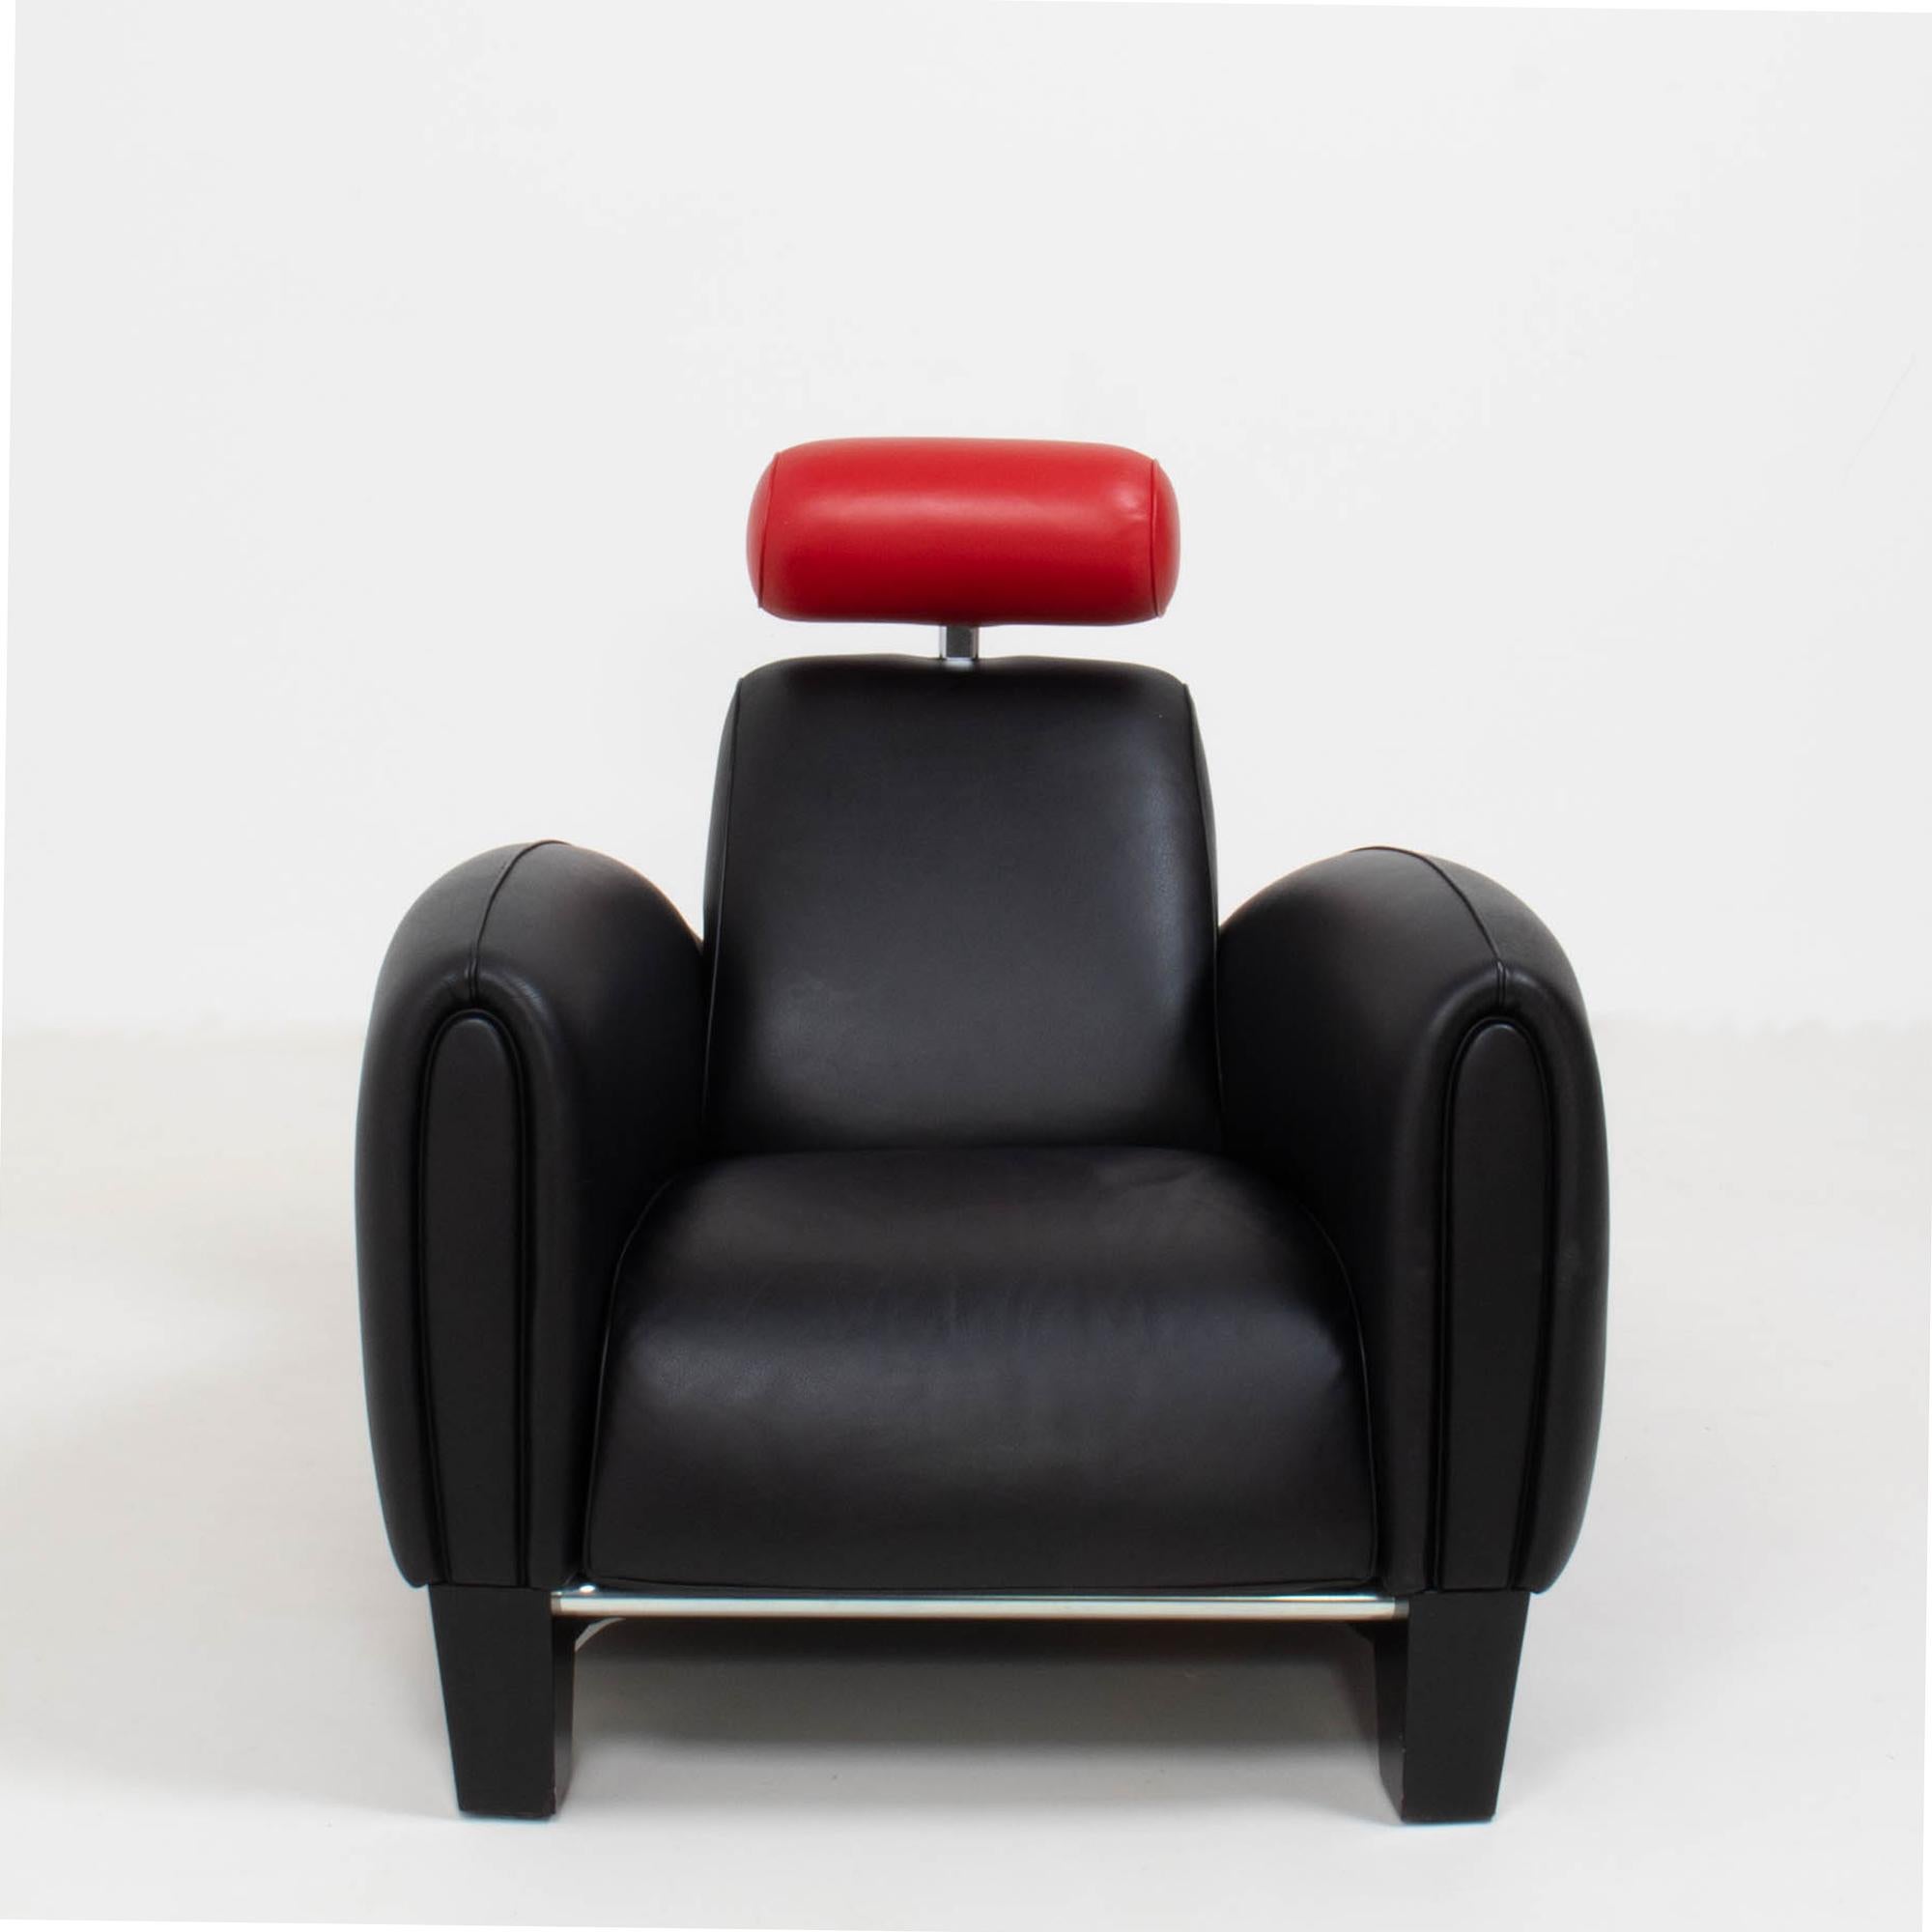 Designed by Franz Romero for Swiss furniture brand De Sede, the DS-57 armchair is a bold piece of design.

Reminiscent of a 1930s racing car, the armchair has an aerodynamic structure that perfectly balances sleek angles with smooth curves. The